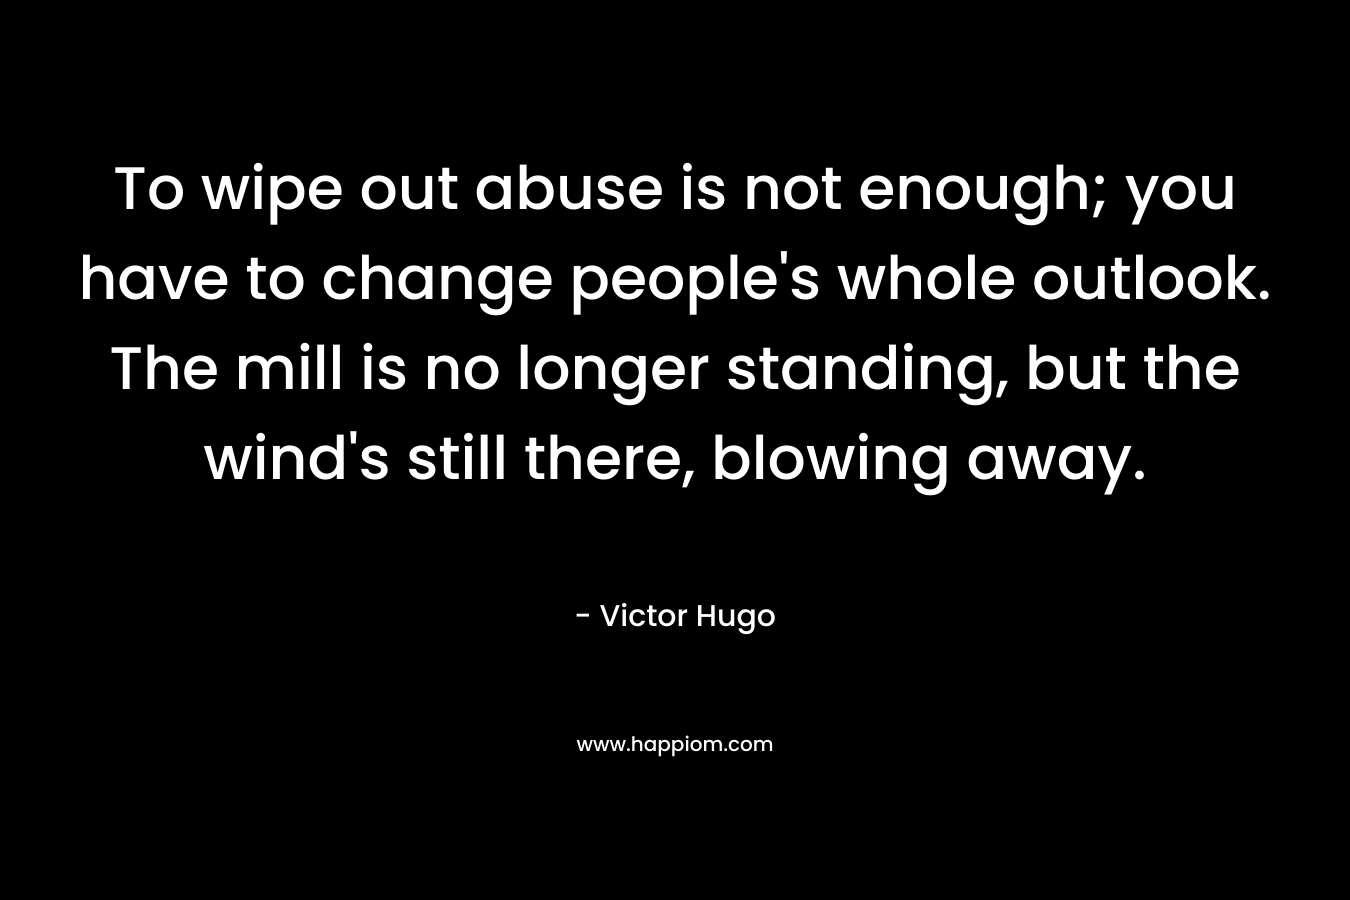 To wipe out abuse is not enough; you have to change people’s whole outlook. The mill is no longer standing, but the wind’s still there, blowing away. – Victor Hugo